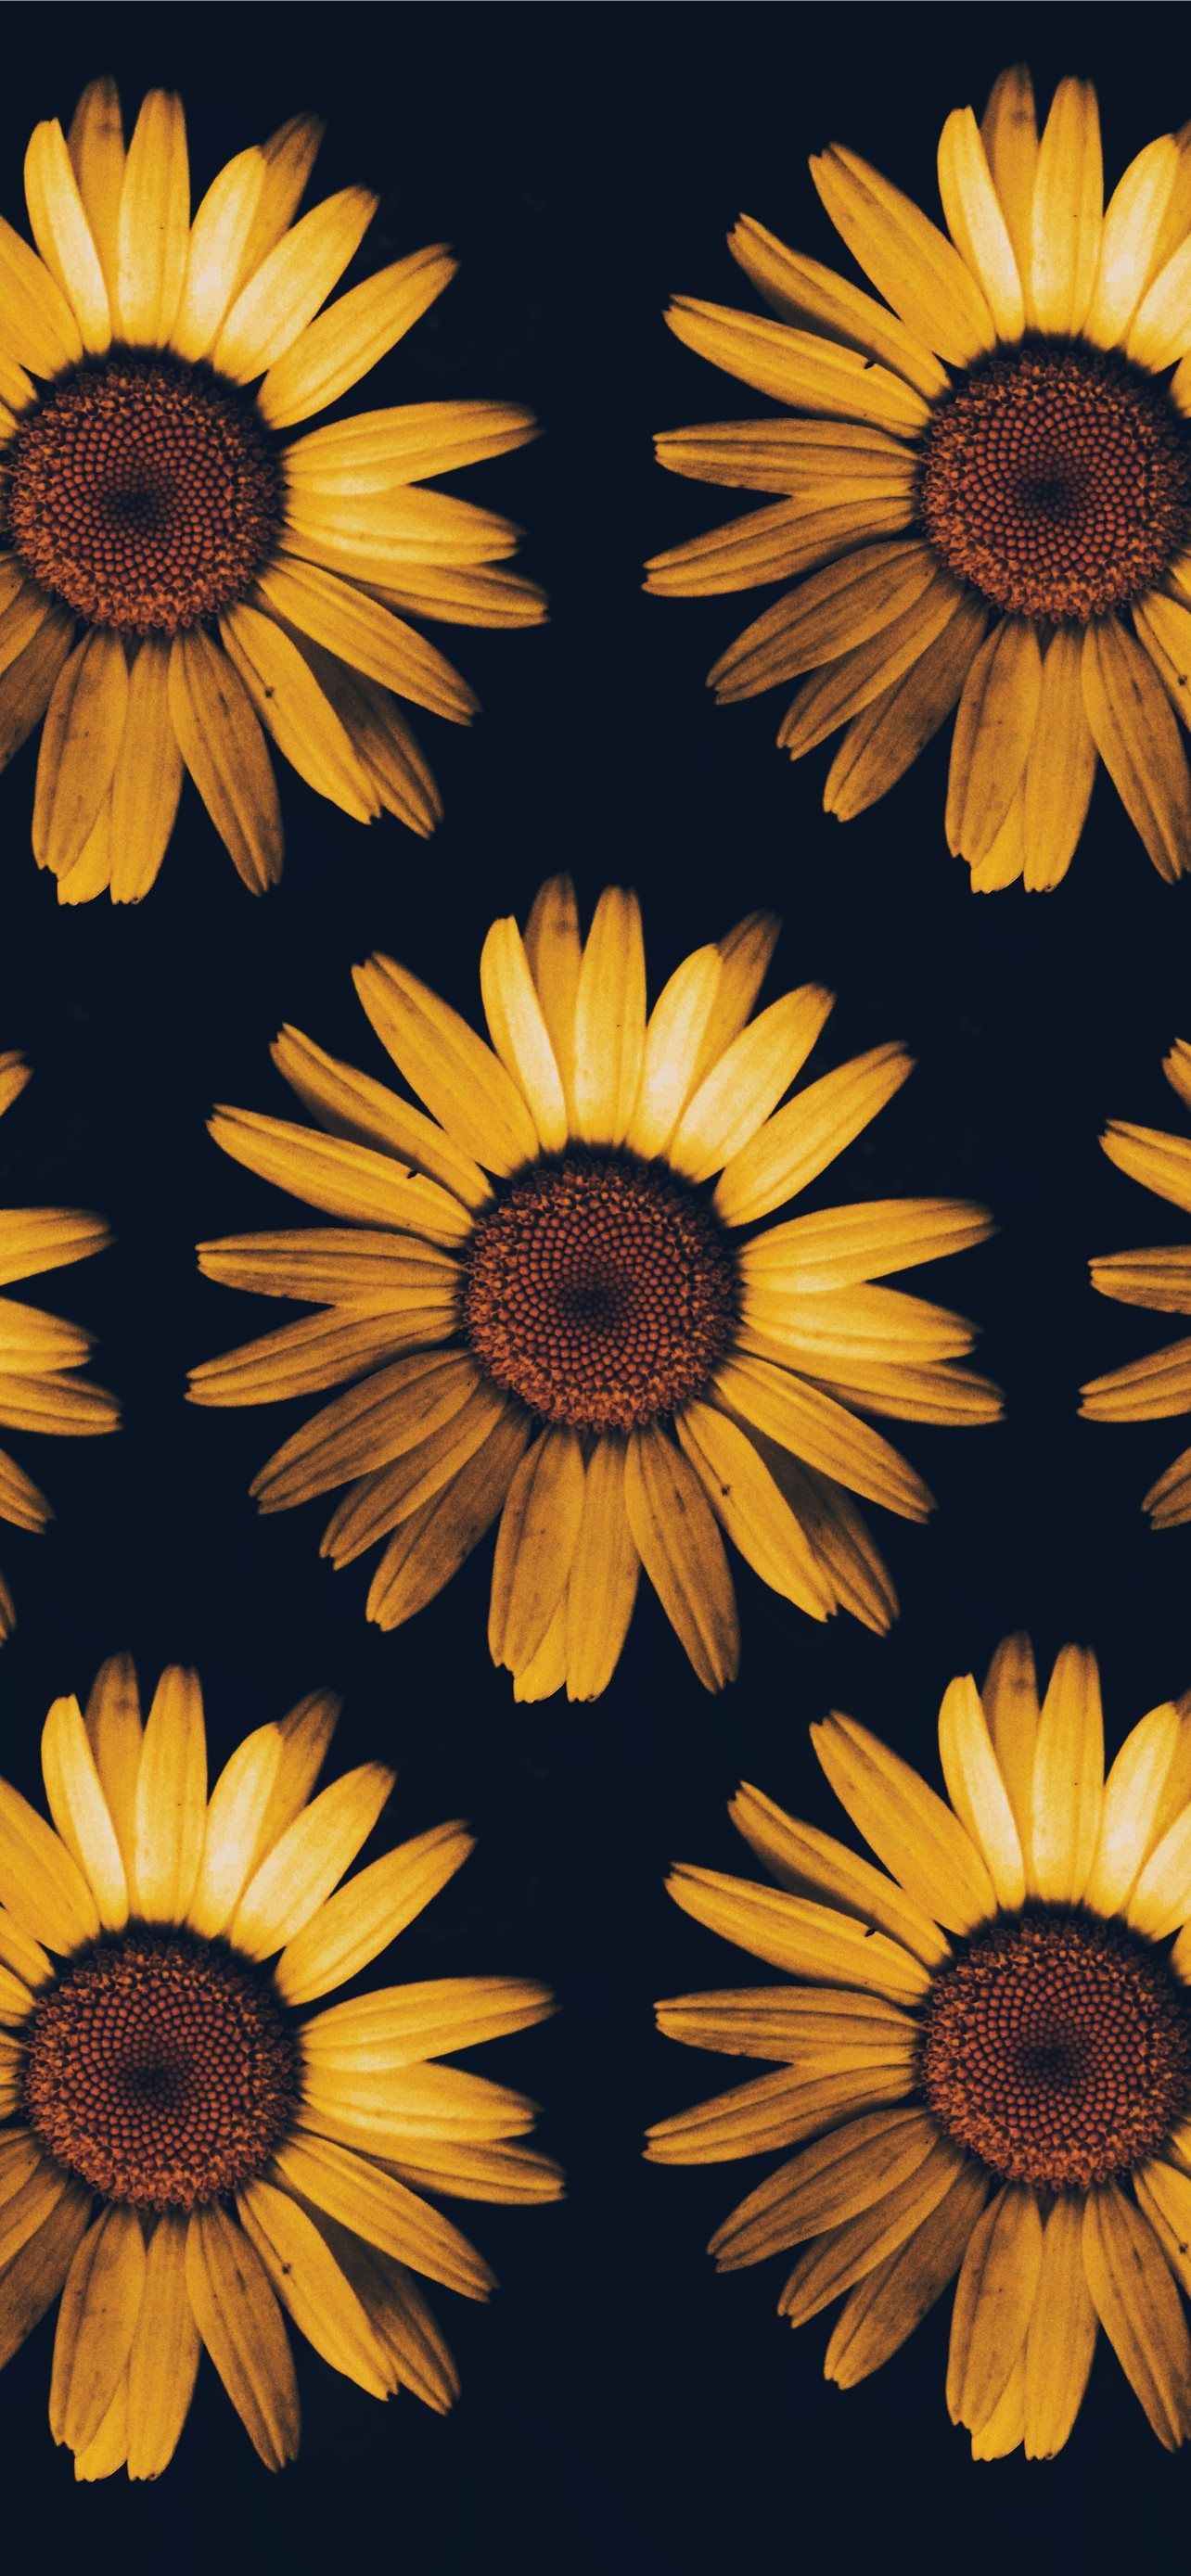 Aesthetic wallpaper of yellow flowers on a black background - Sunflower, photography